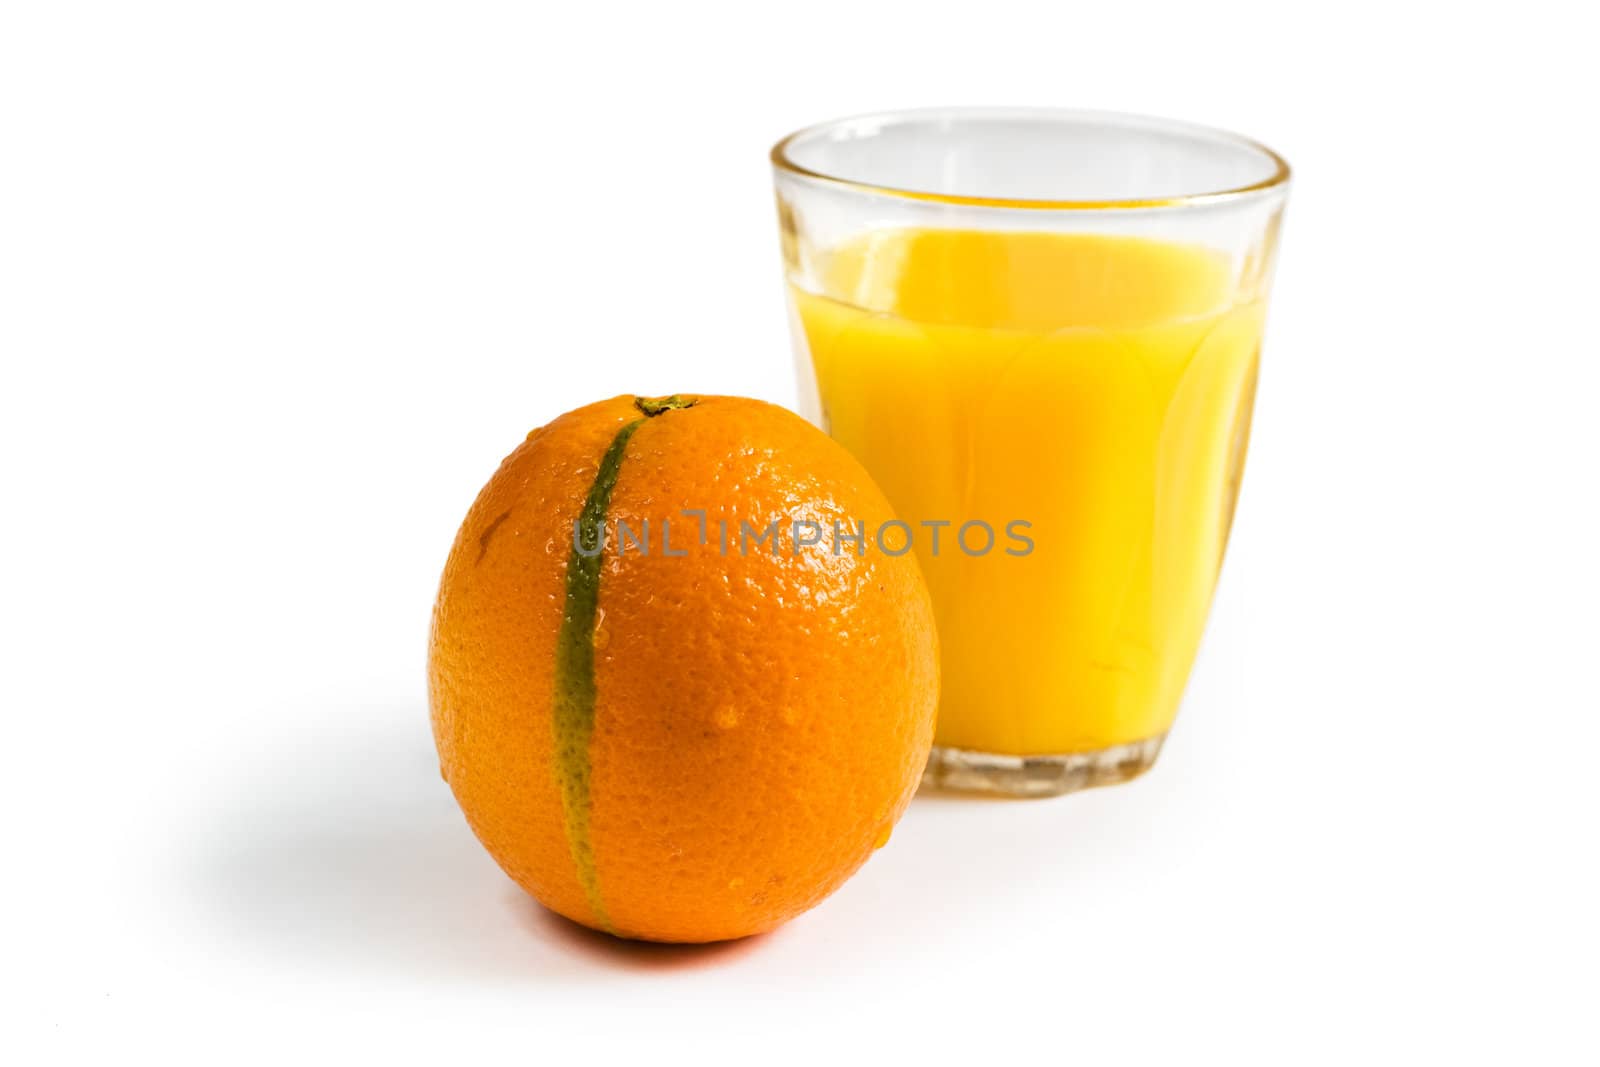 A Glass of Orange juice in background with Fruits in foreground. Clipping path included